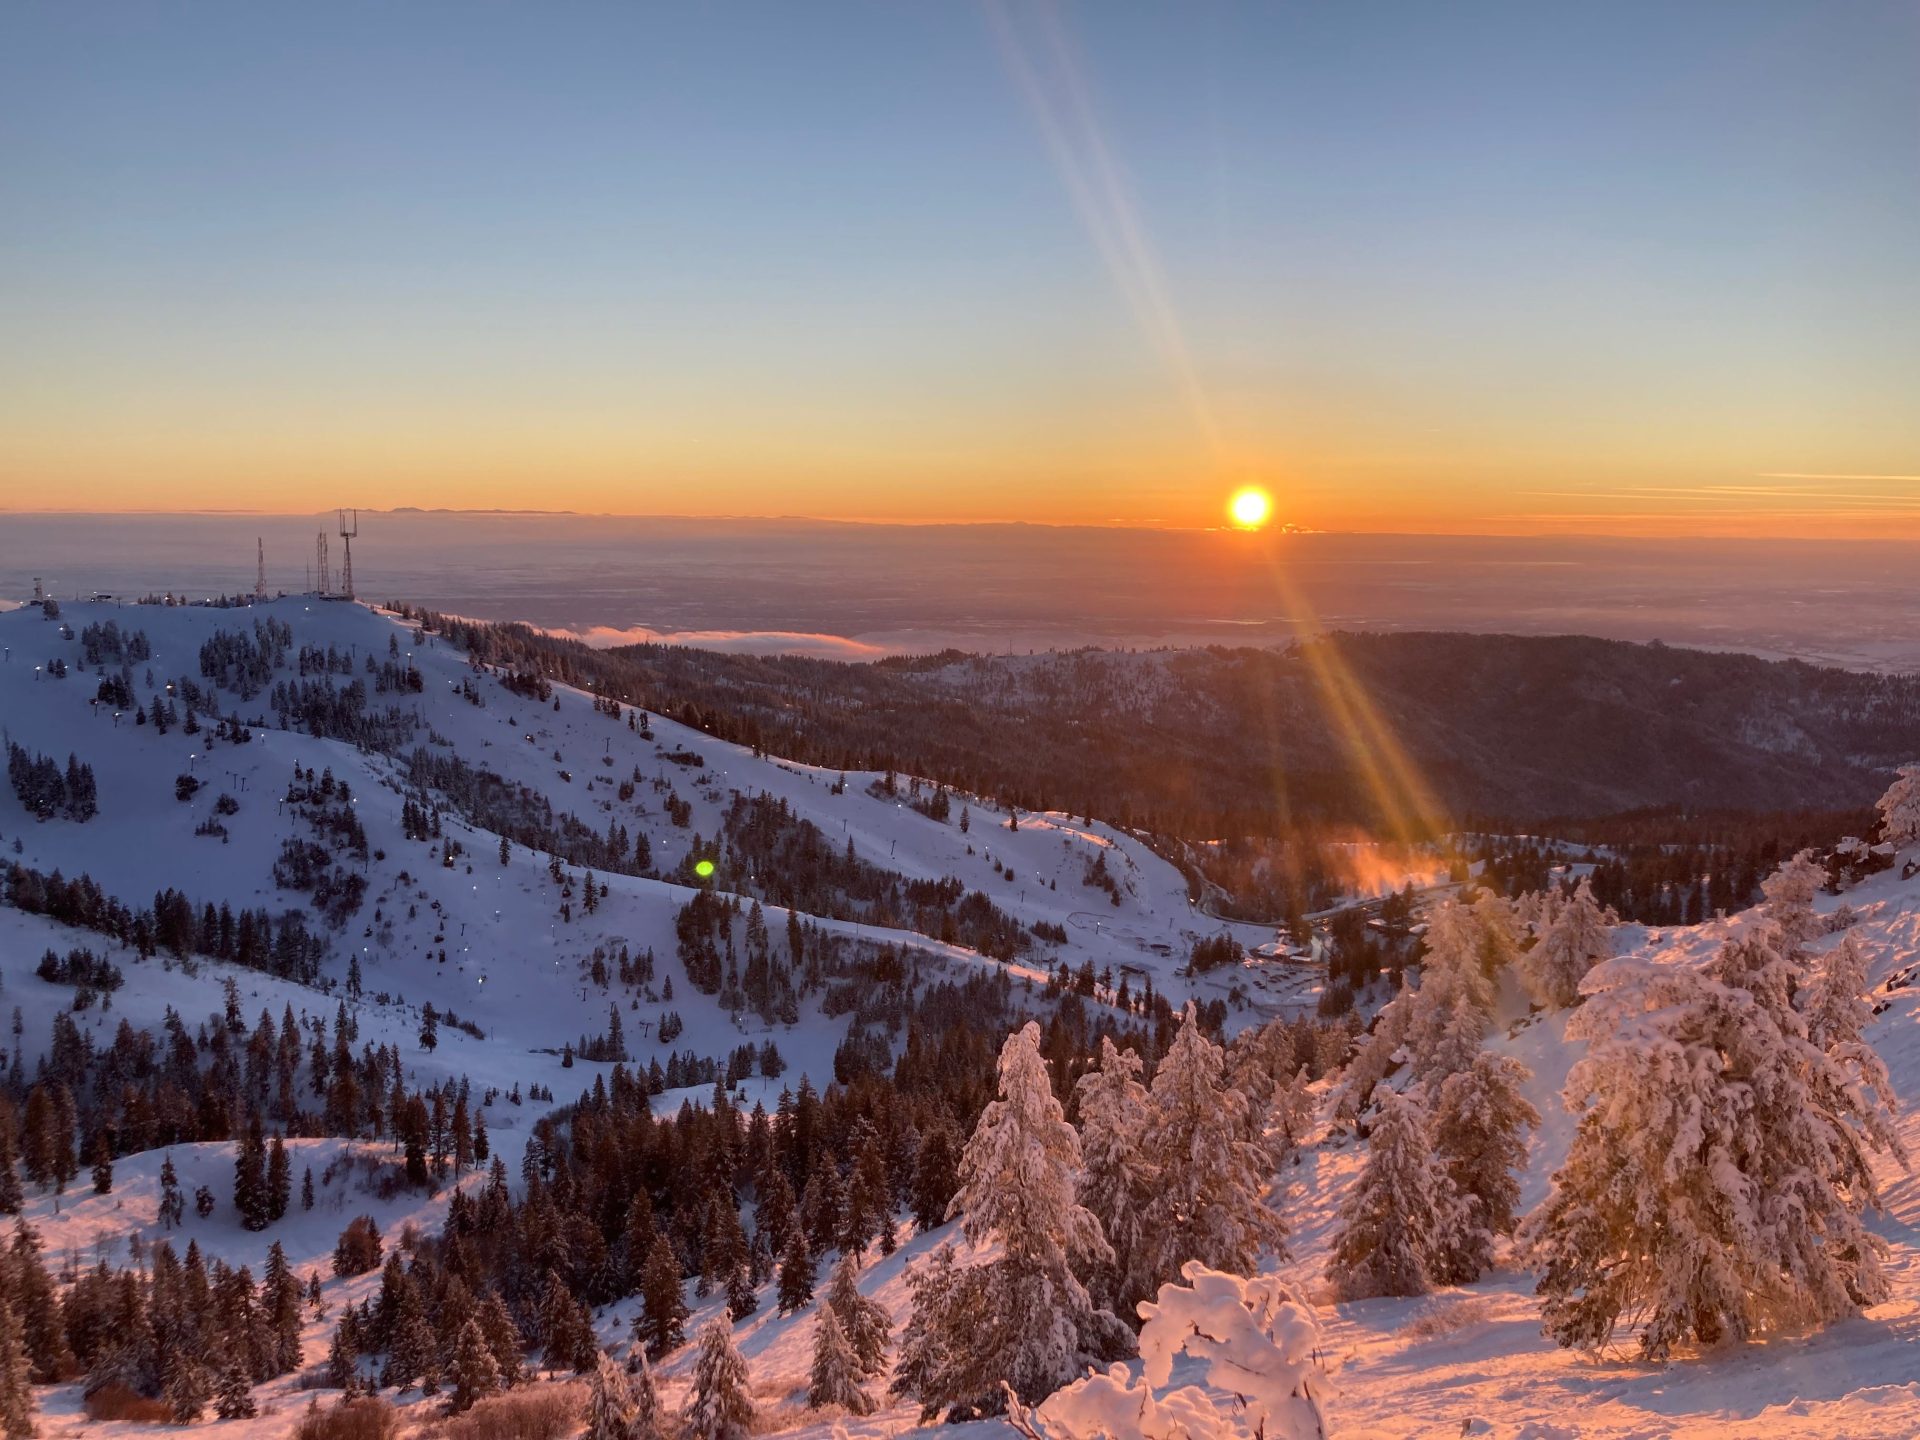 Sunset over Bogus Basin ski resort with views of Boise and the Treasure Valley.